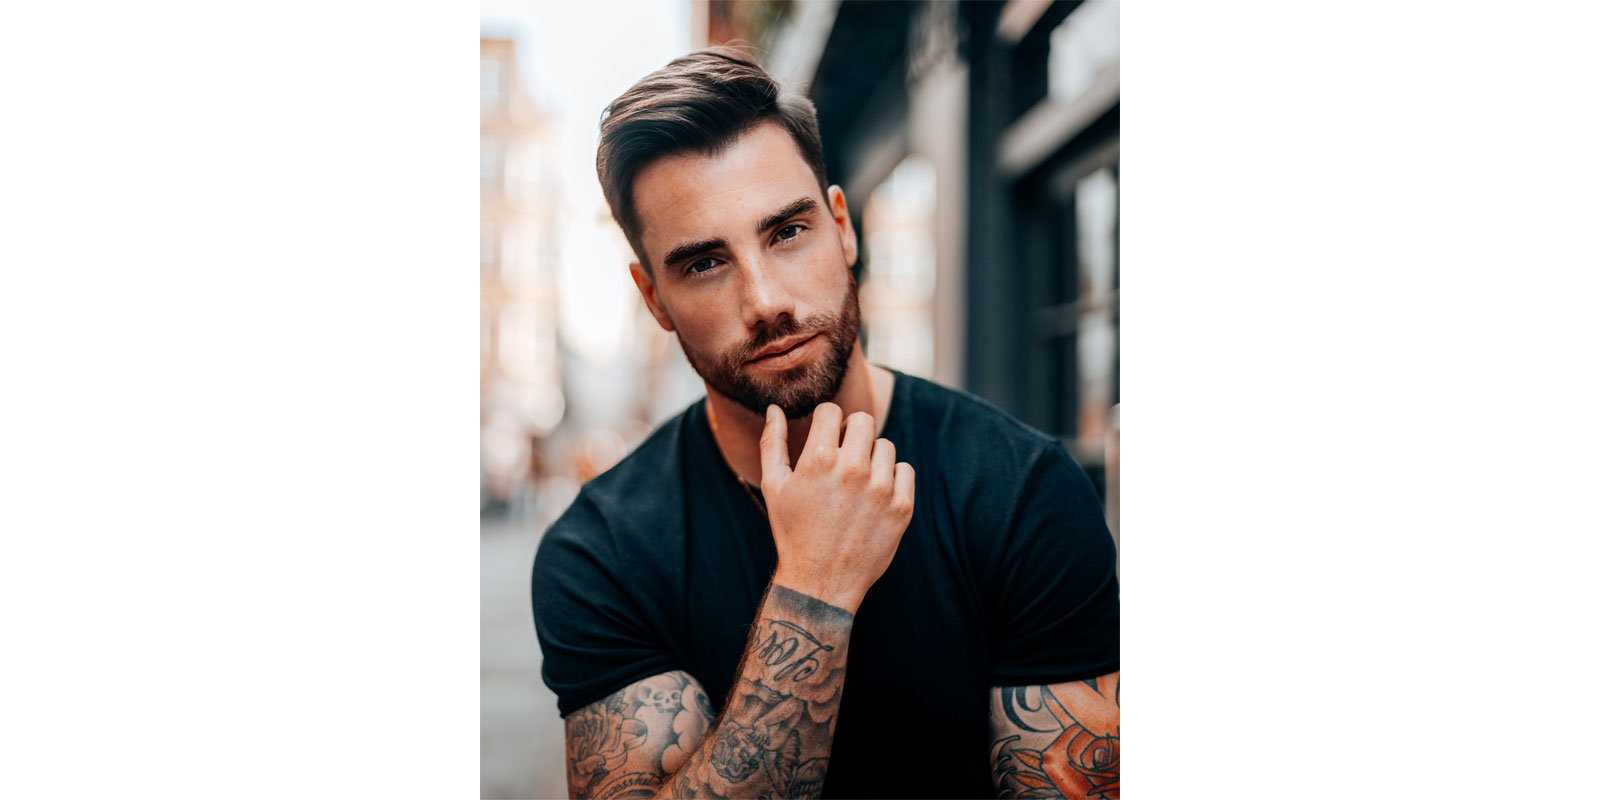 Unparalleled Barber with a Beard and a Tattoo Is Cutting the Hair of His  Client in the Barbershop, People Stock Footage ft. barber & beard - Envato  Elements